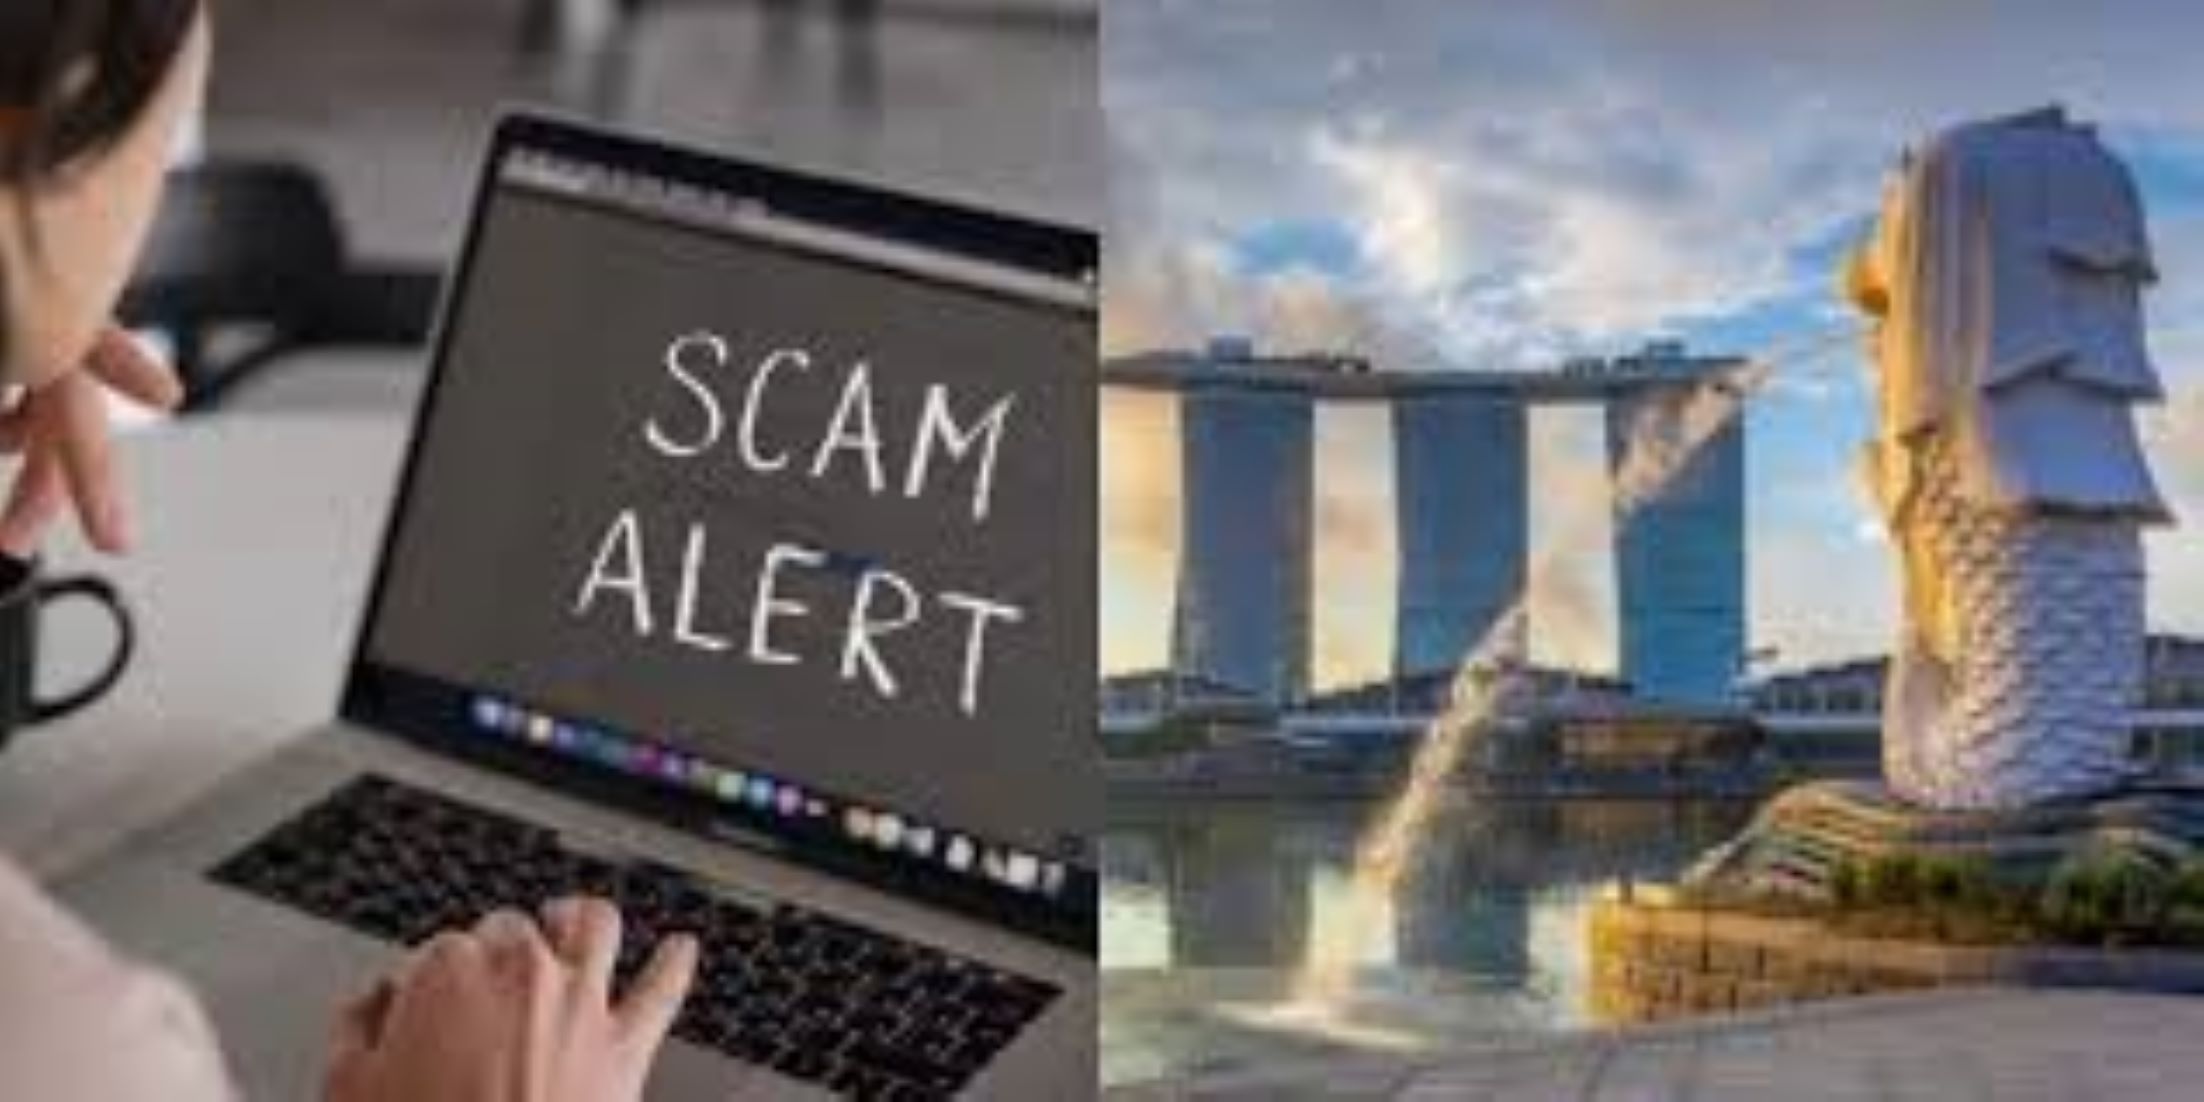 Singapore Recorded Over 46,000 Scam Cases Last Year